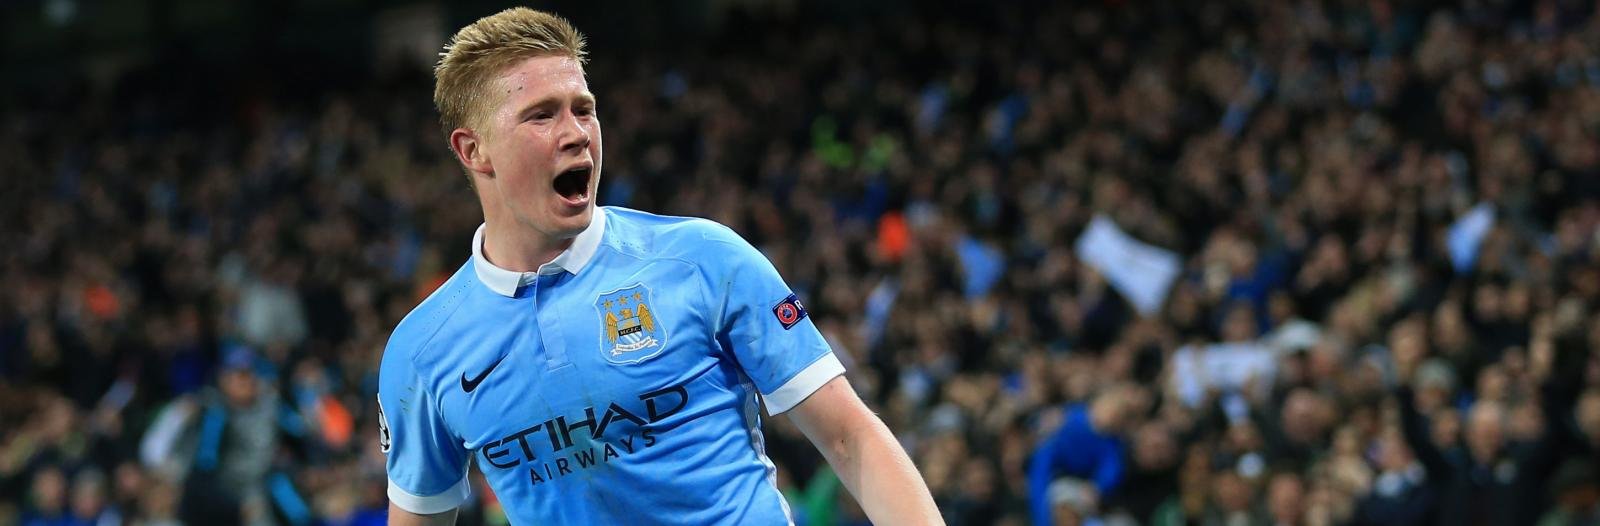 ‘Man City’s De Bruyne is the second best player in the world, behind Messi’